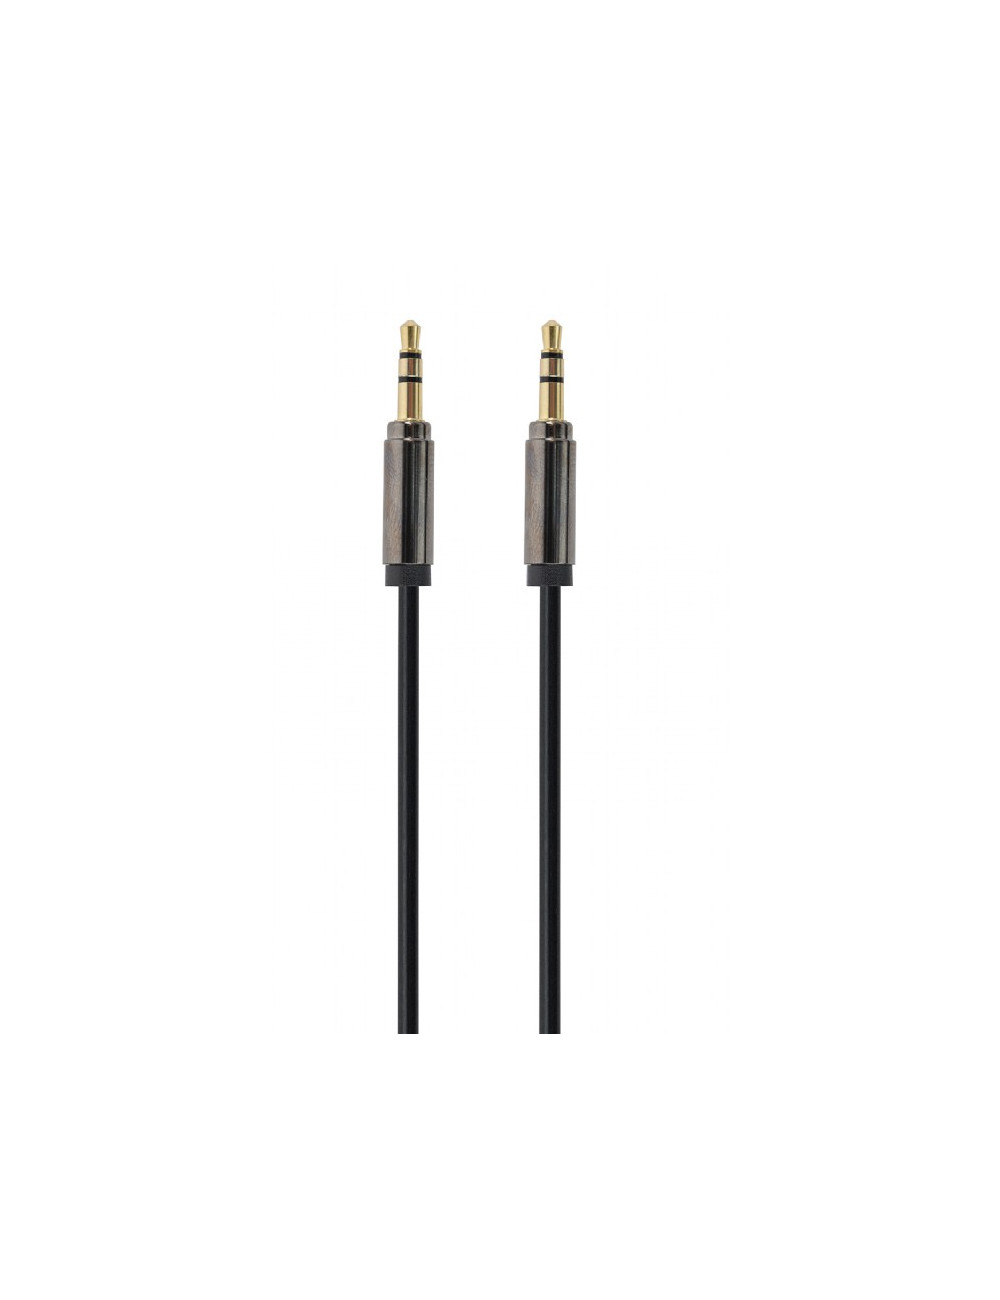 Cablexpert 3.5 mm Stereo Audio Cable, 0.75 m, Black